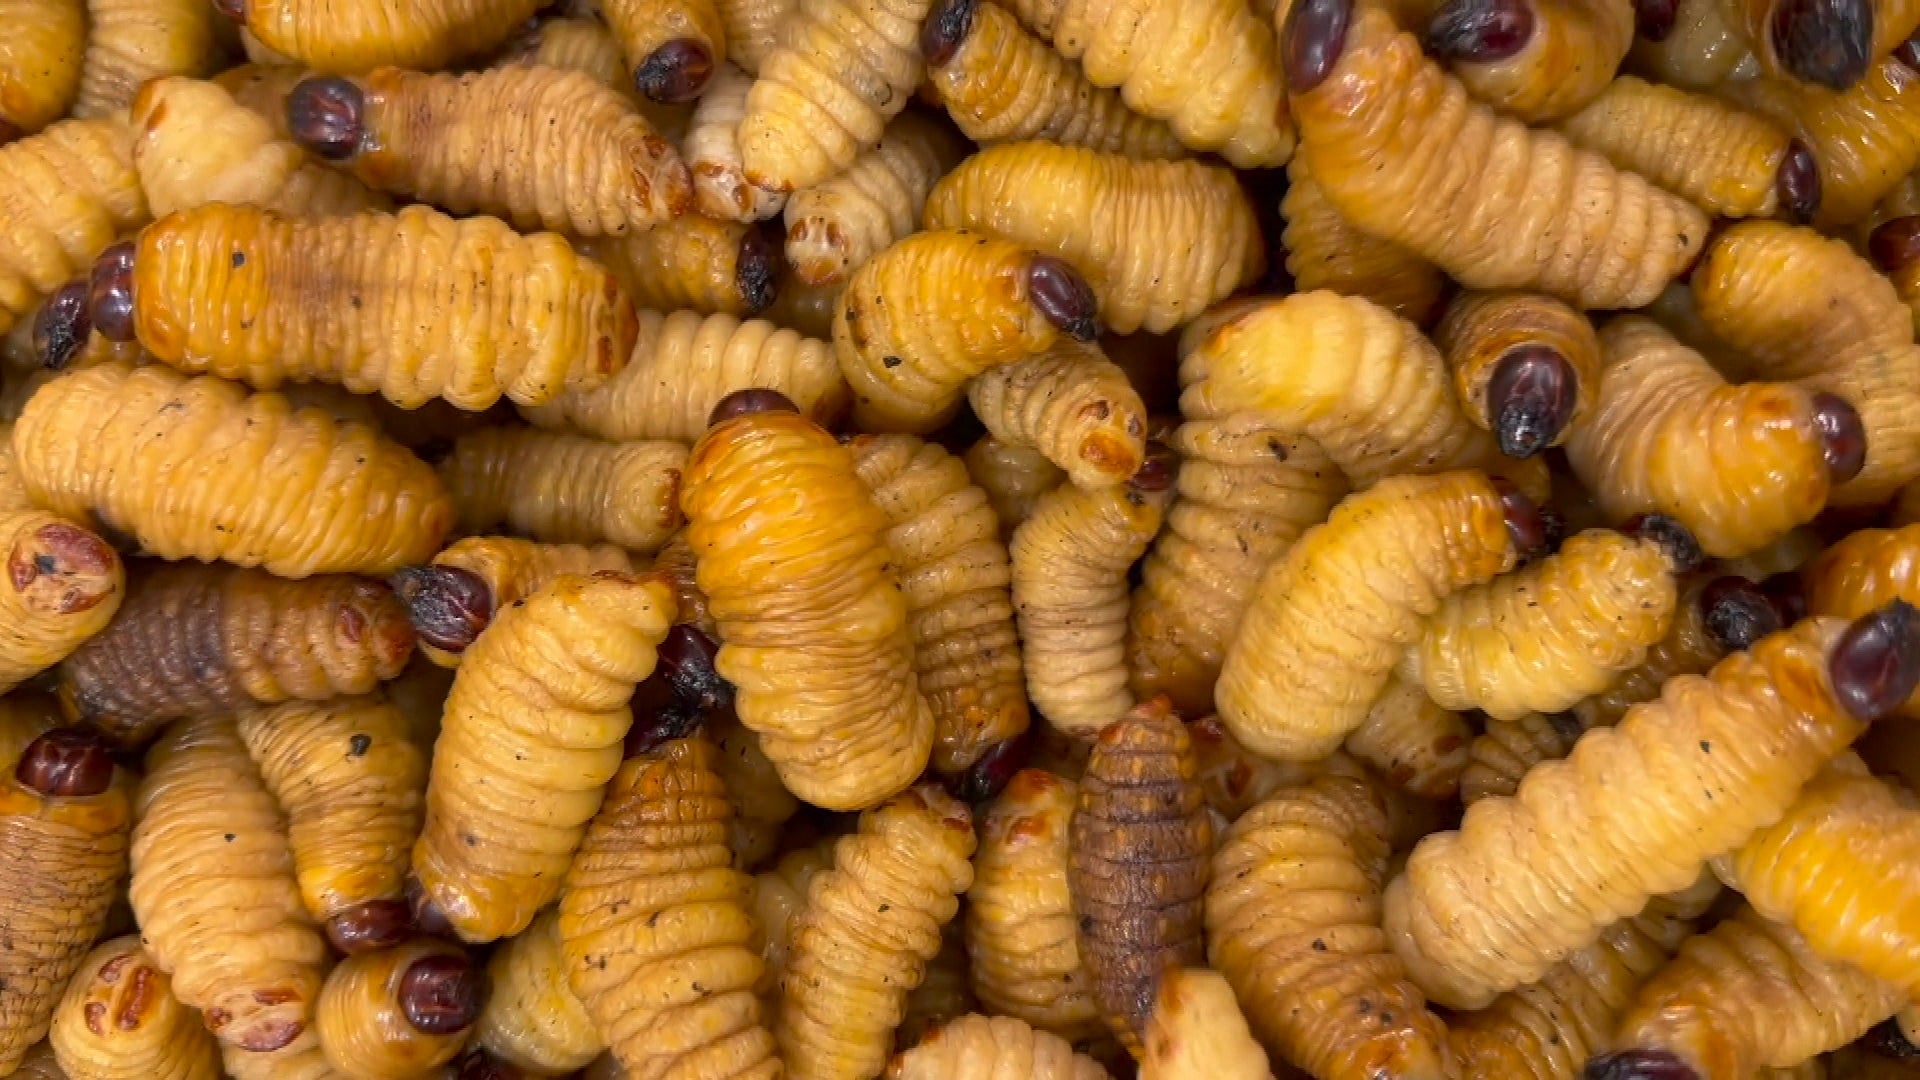 Palm Worms Are Nutritious, Delicious, and Kind of Terrifying | Inside ...